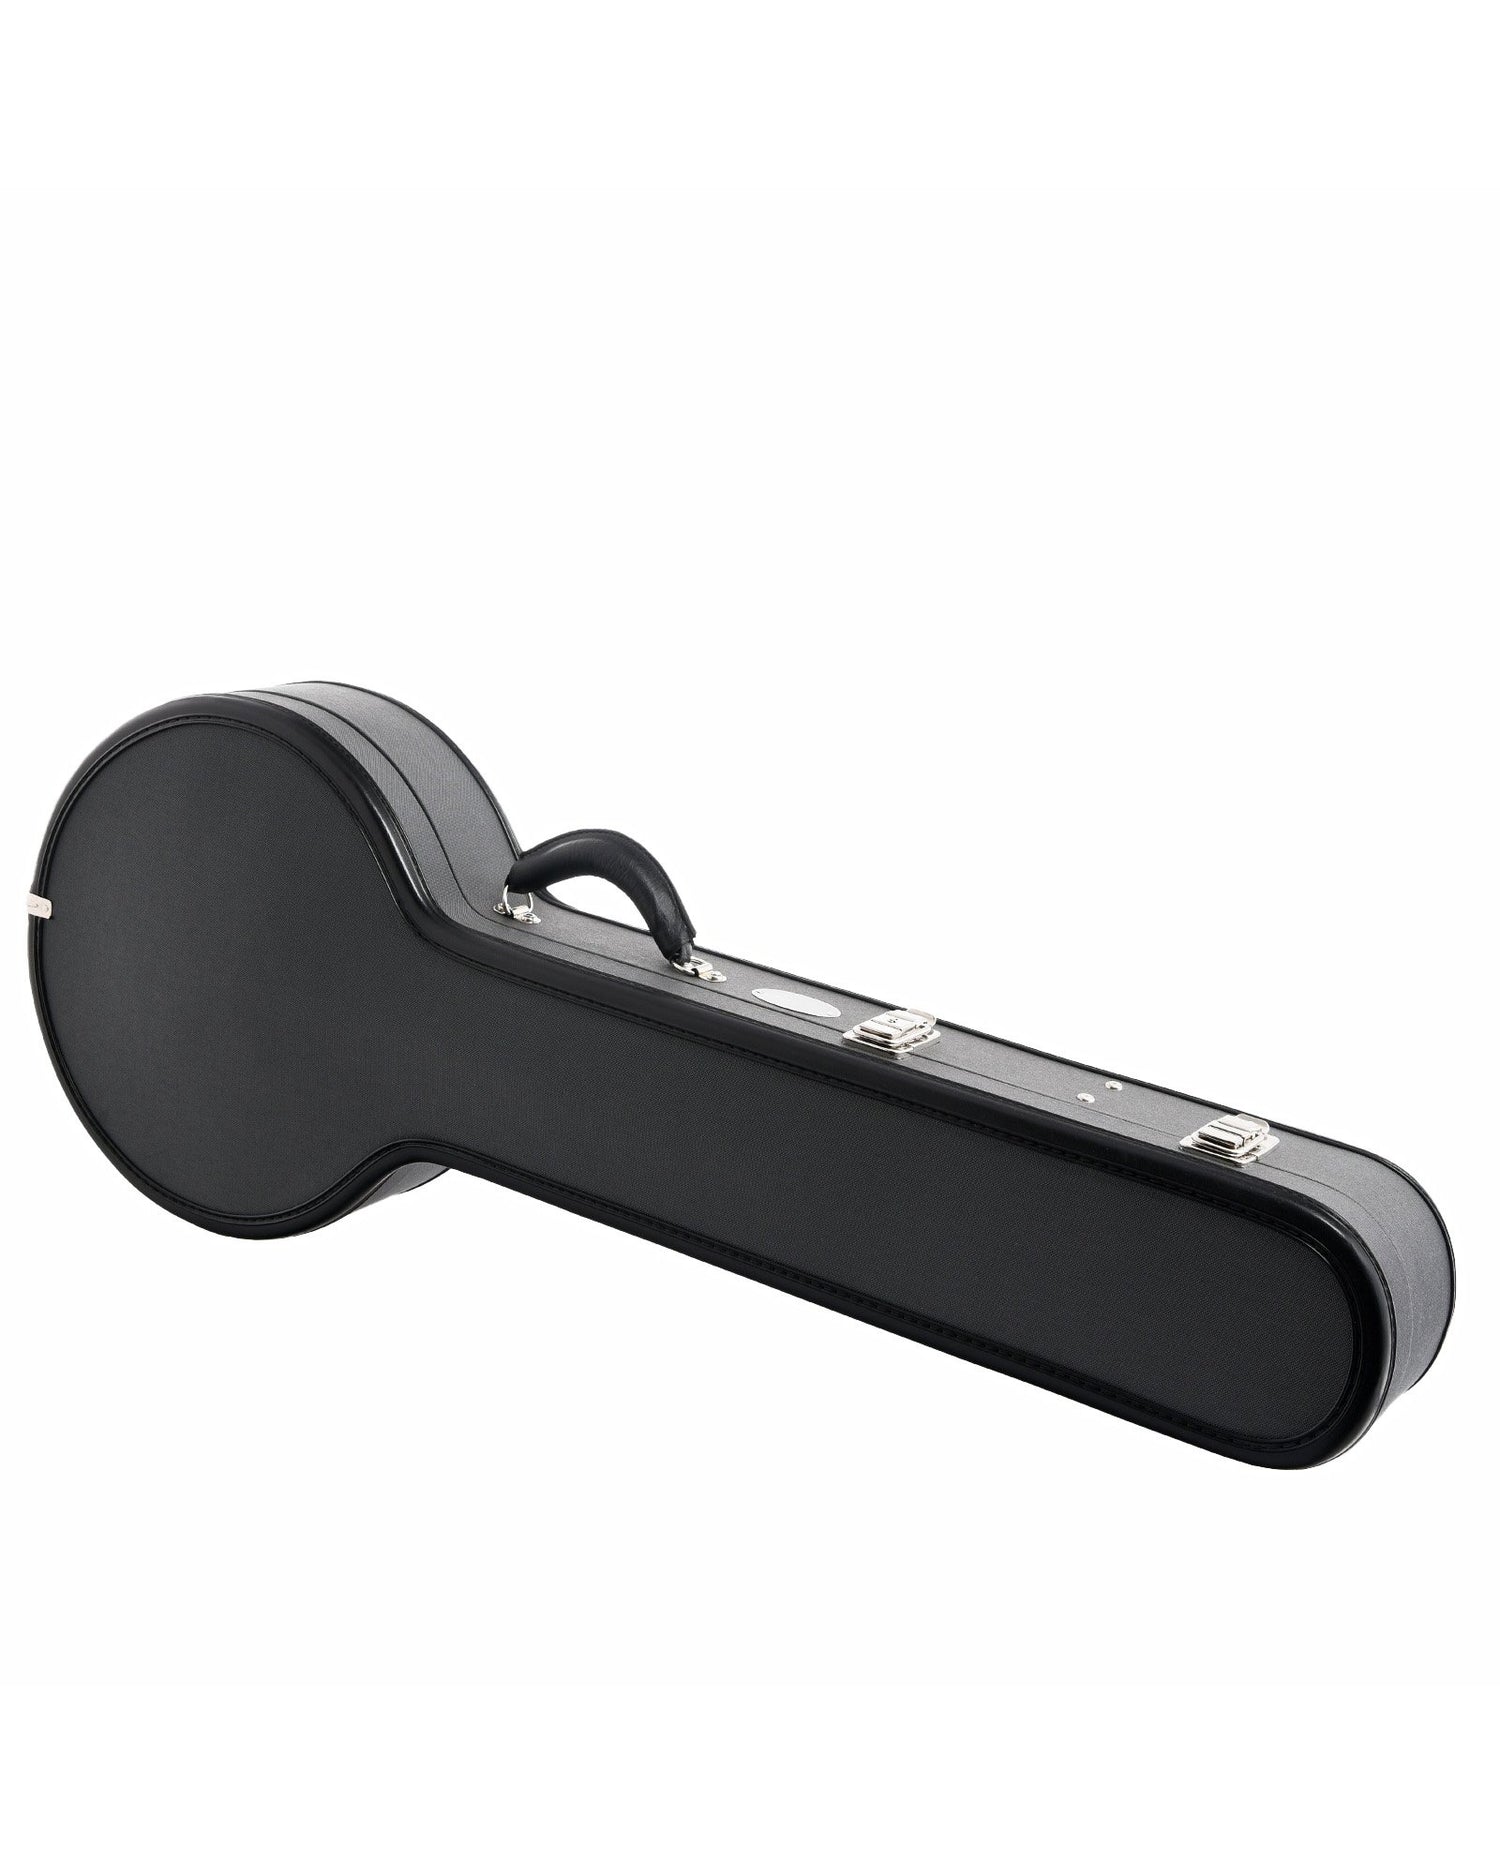 Image 1 of Ameritage Silver Series Banjo Case - SKU# ASSC2-OB11 : Product Type Accessories & Parts : Elderly Instruments